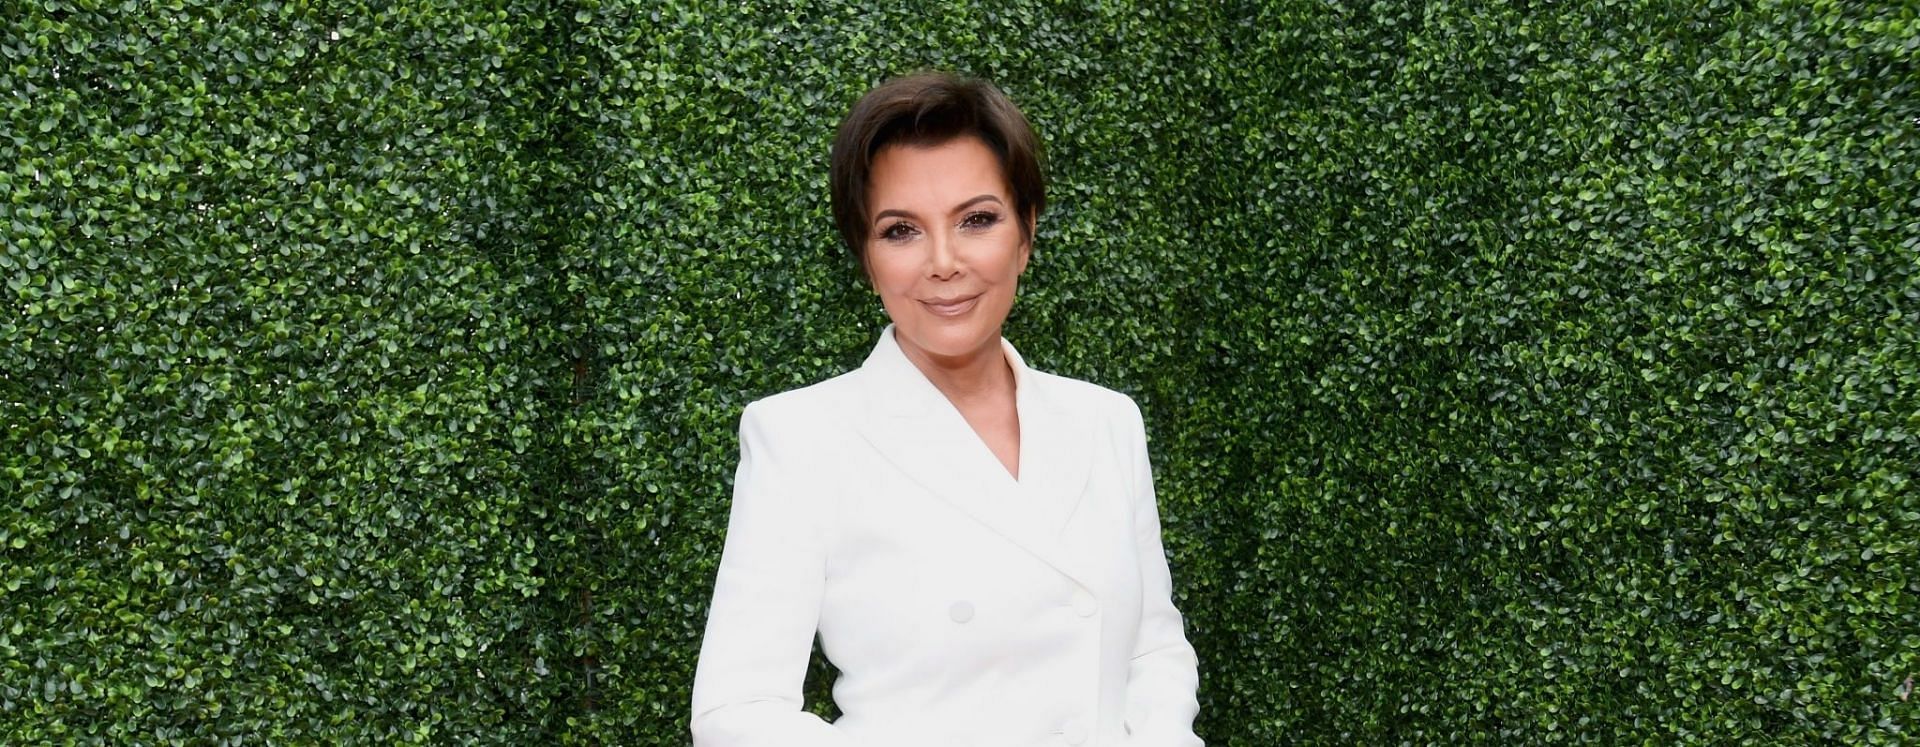 Kris Jenner has an approximate net worth of $190 million (Image via Emma McIntyre/Getty Images)